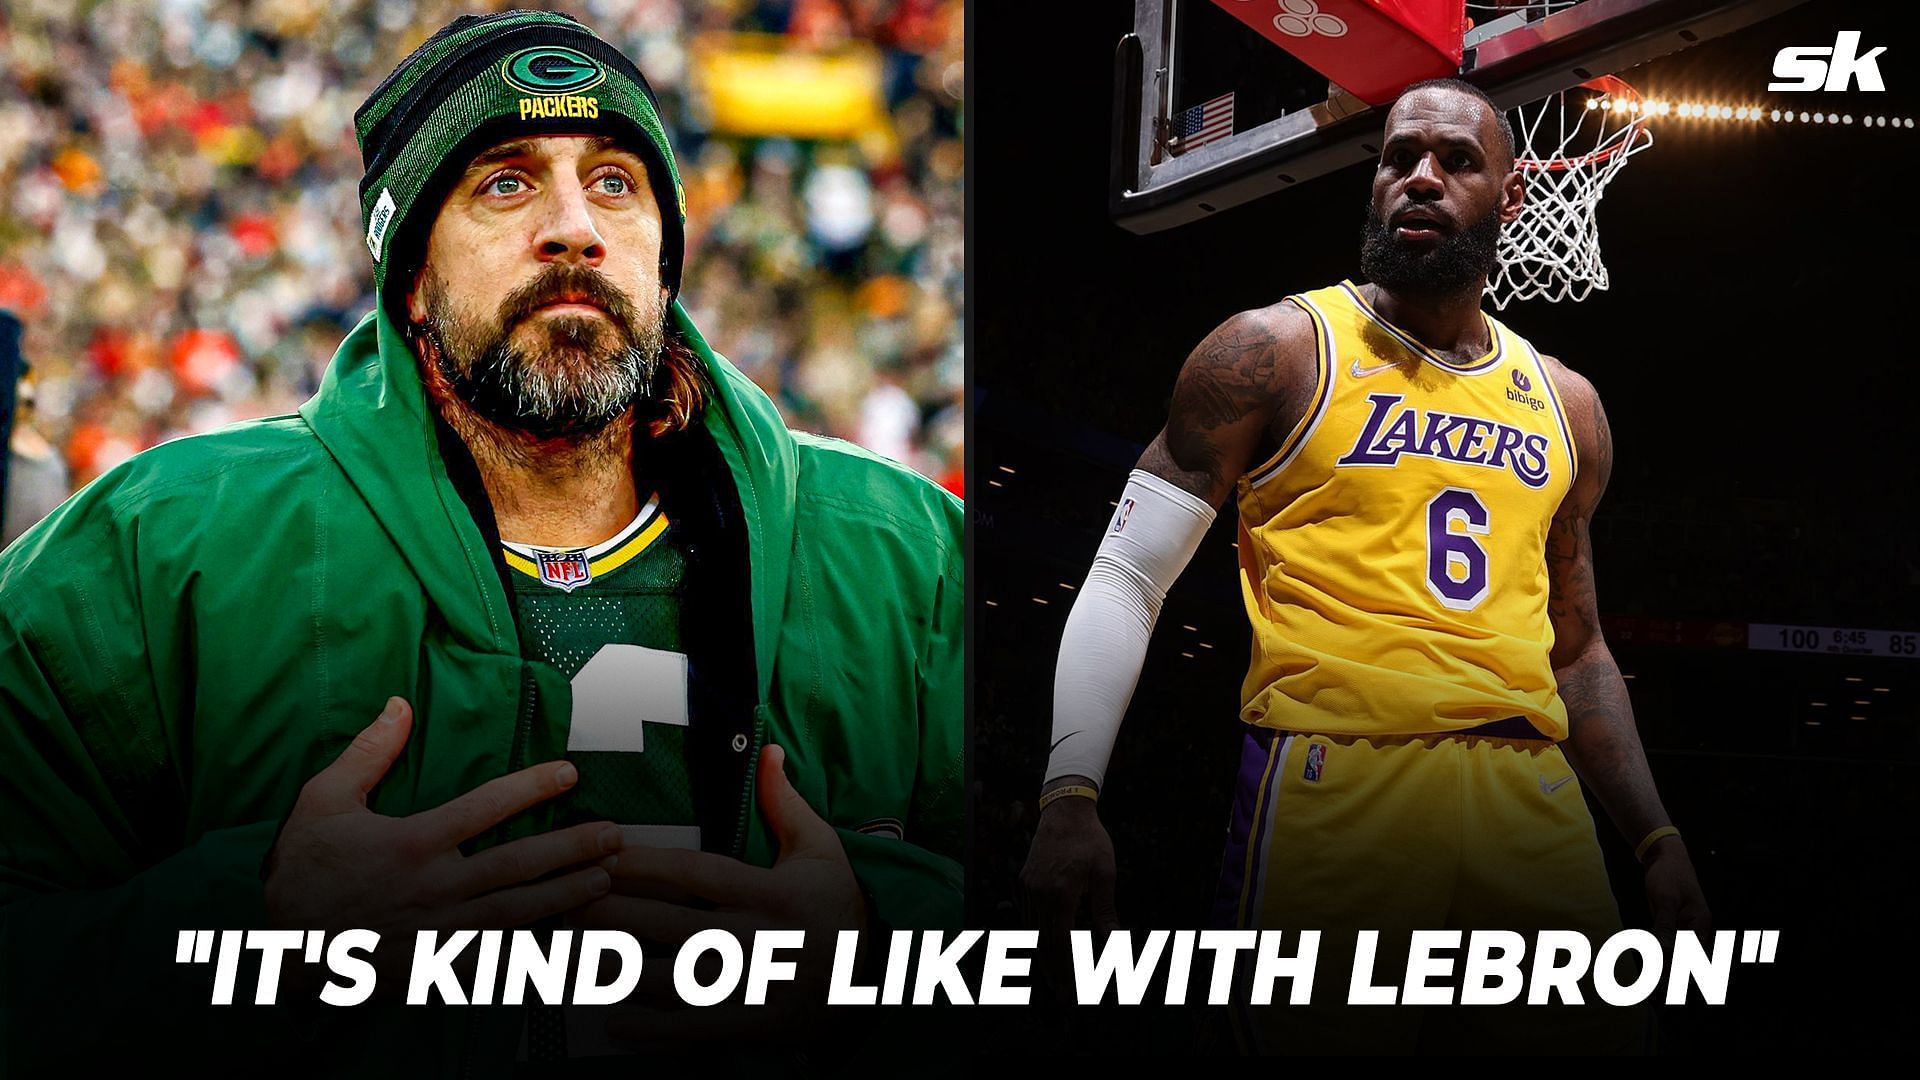  Jay Williams compared Aaron Rodgers to LeBron James.